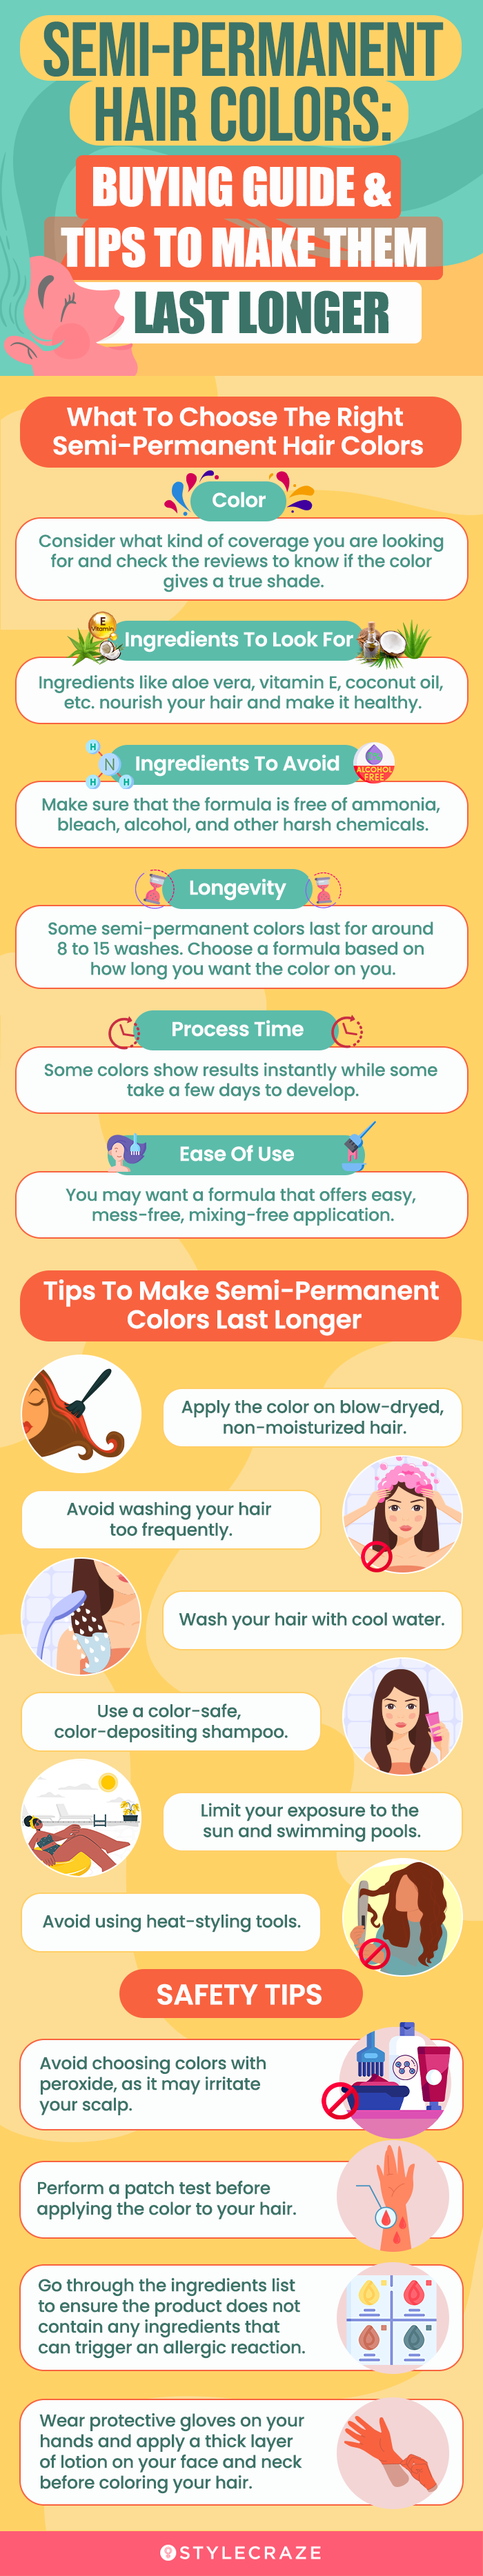 Semi-Permanent Hair Colors: Buying Guide And Tips